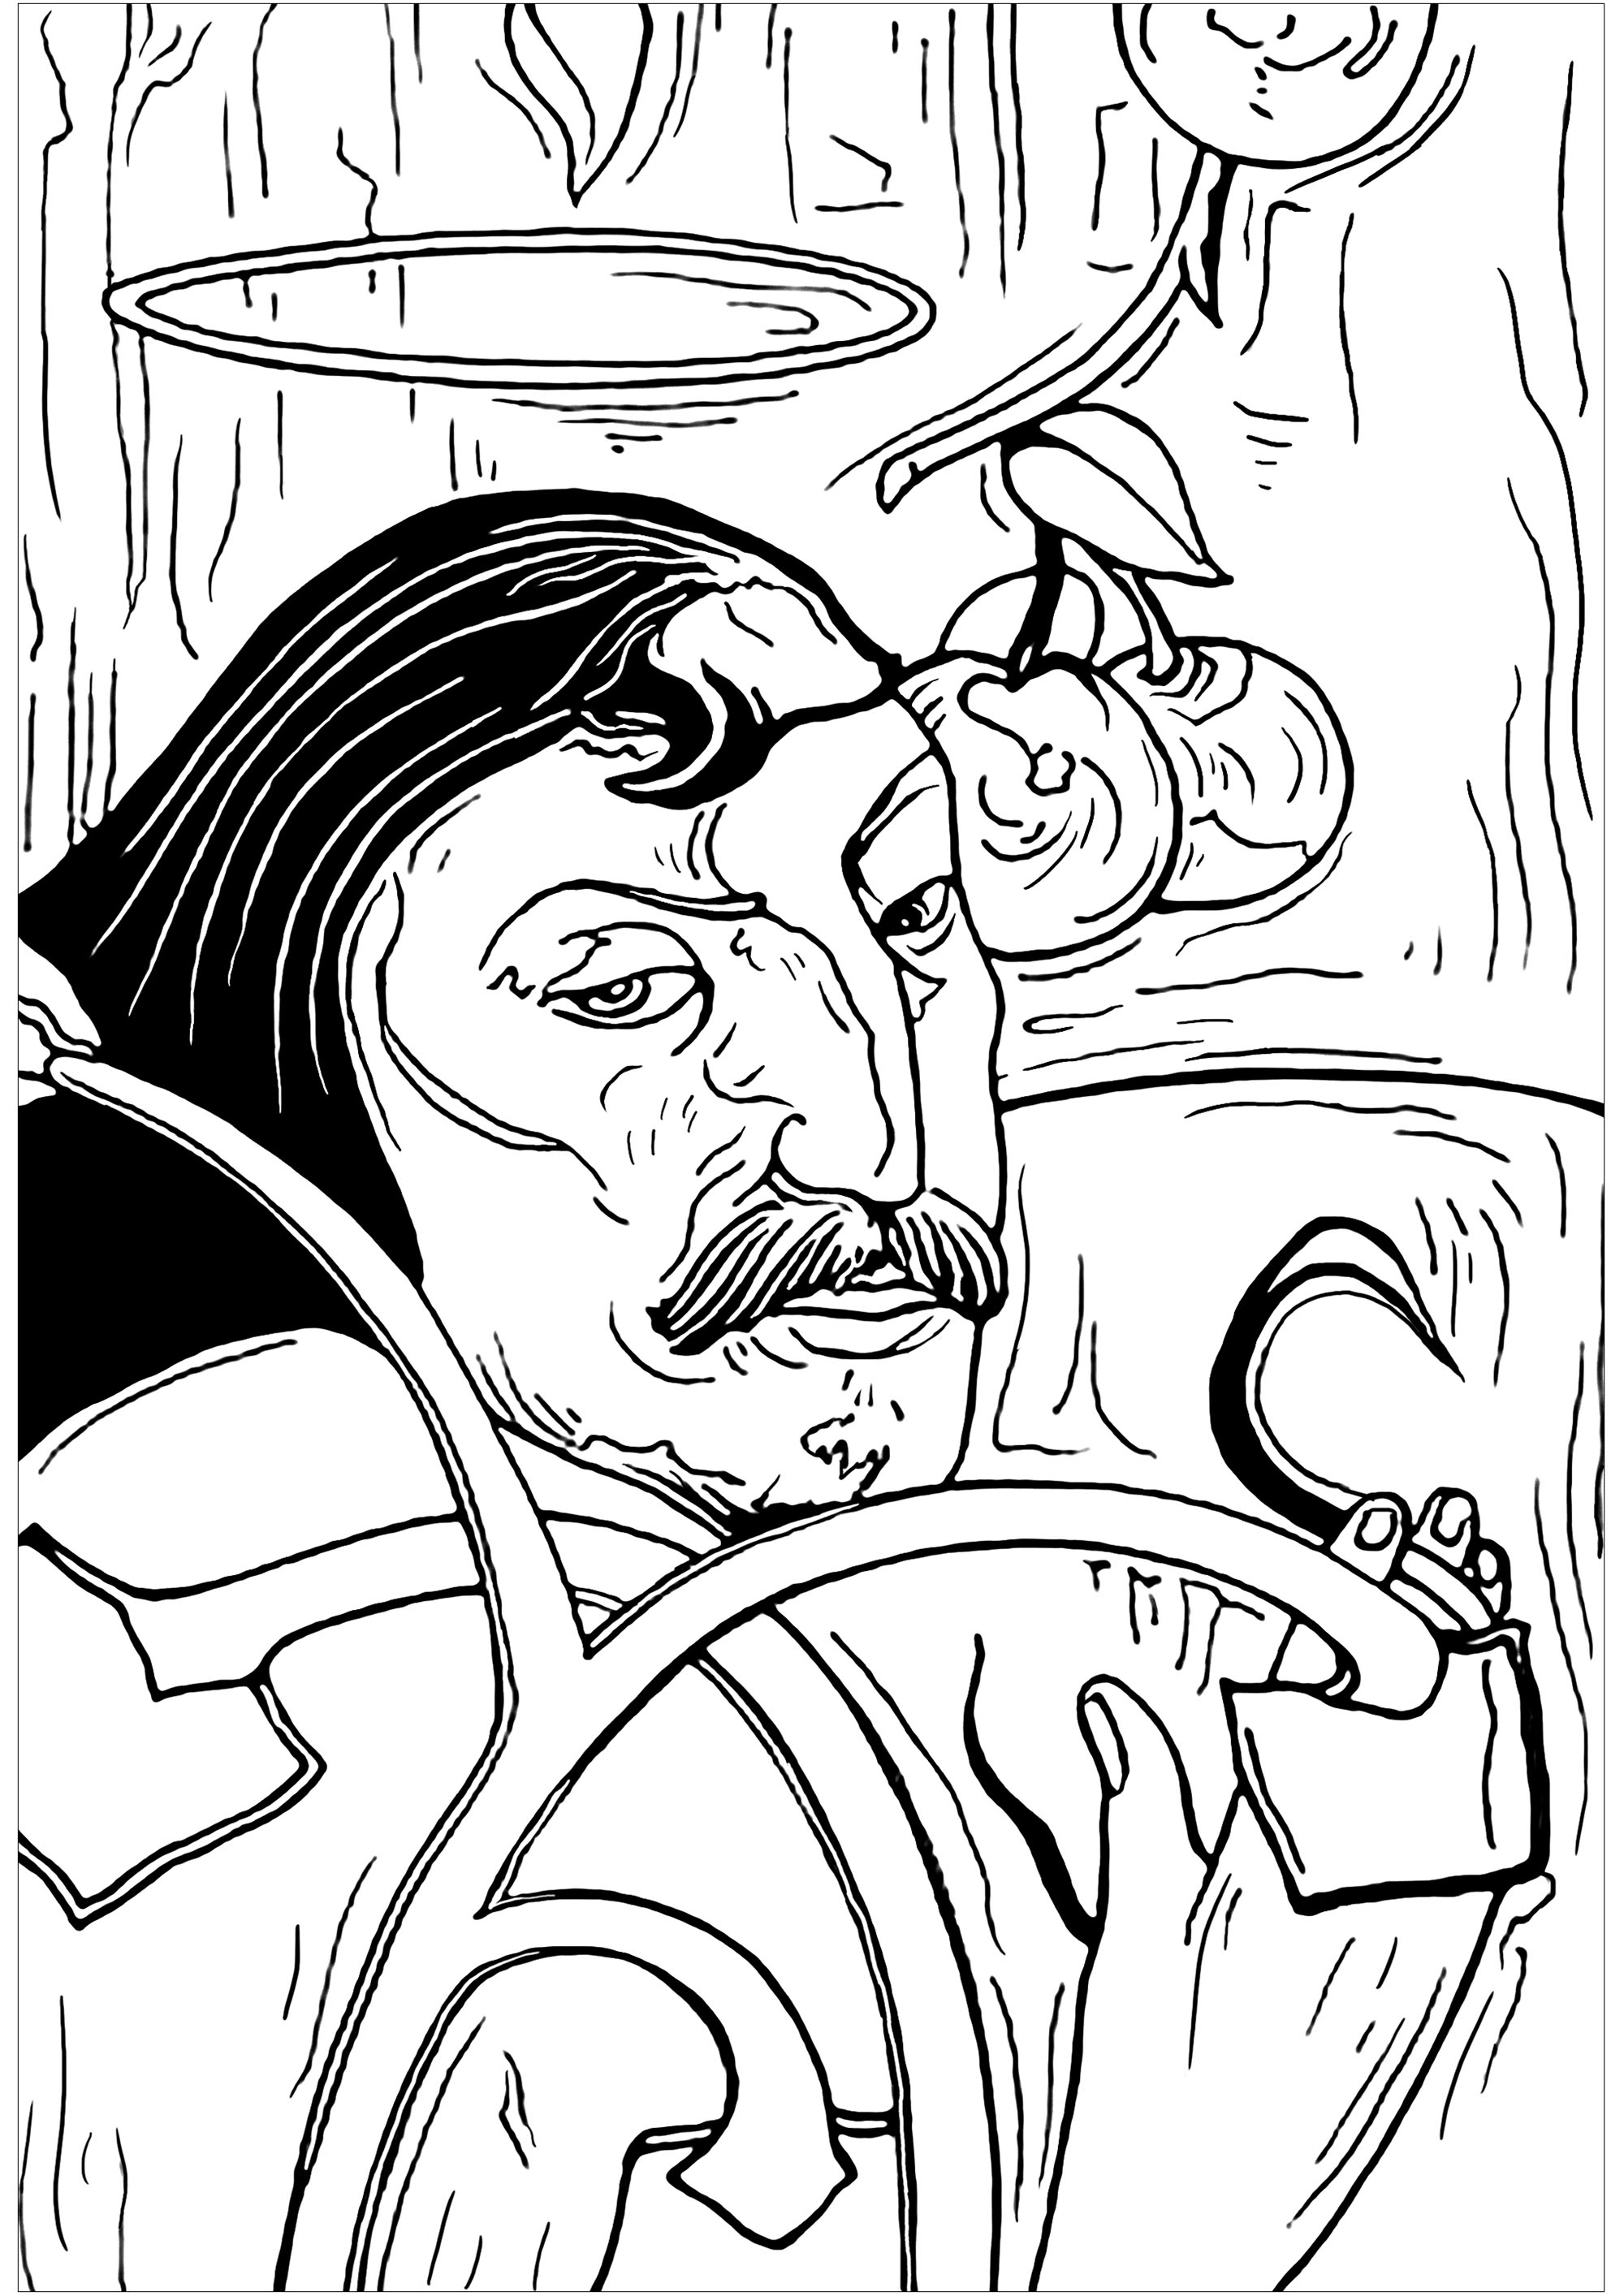 Coloring page inspired by a self-portrait by artist Paul Gauguin : Self-Portrait with Halo (1889), Artist : Art. Isabelle